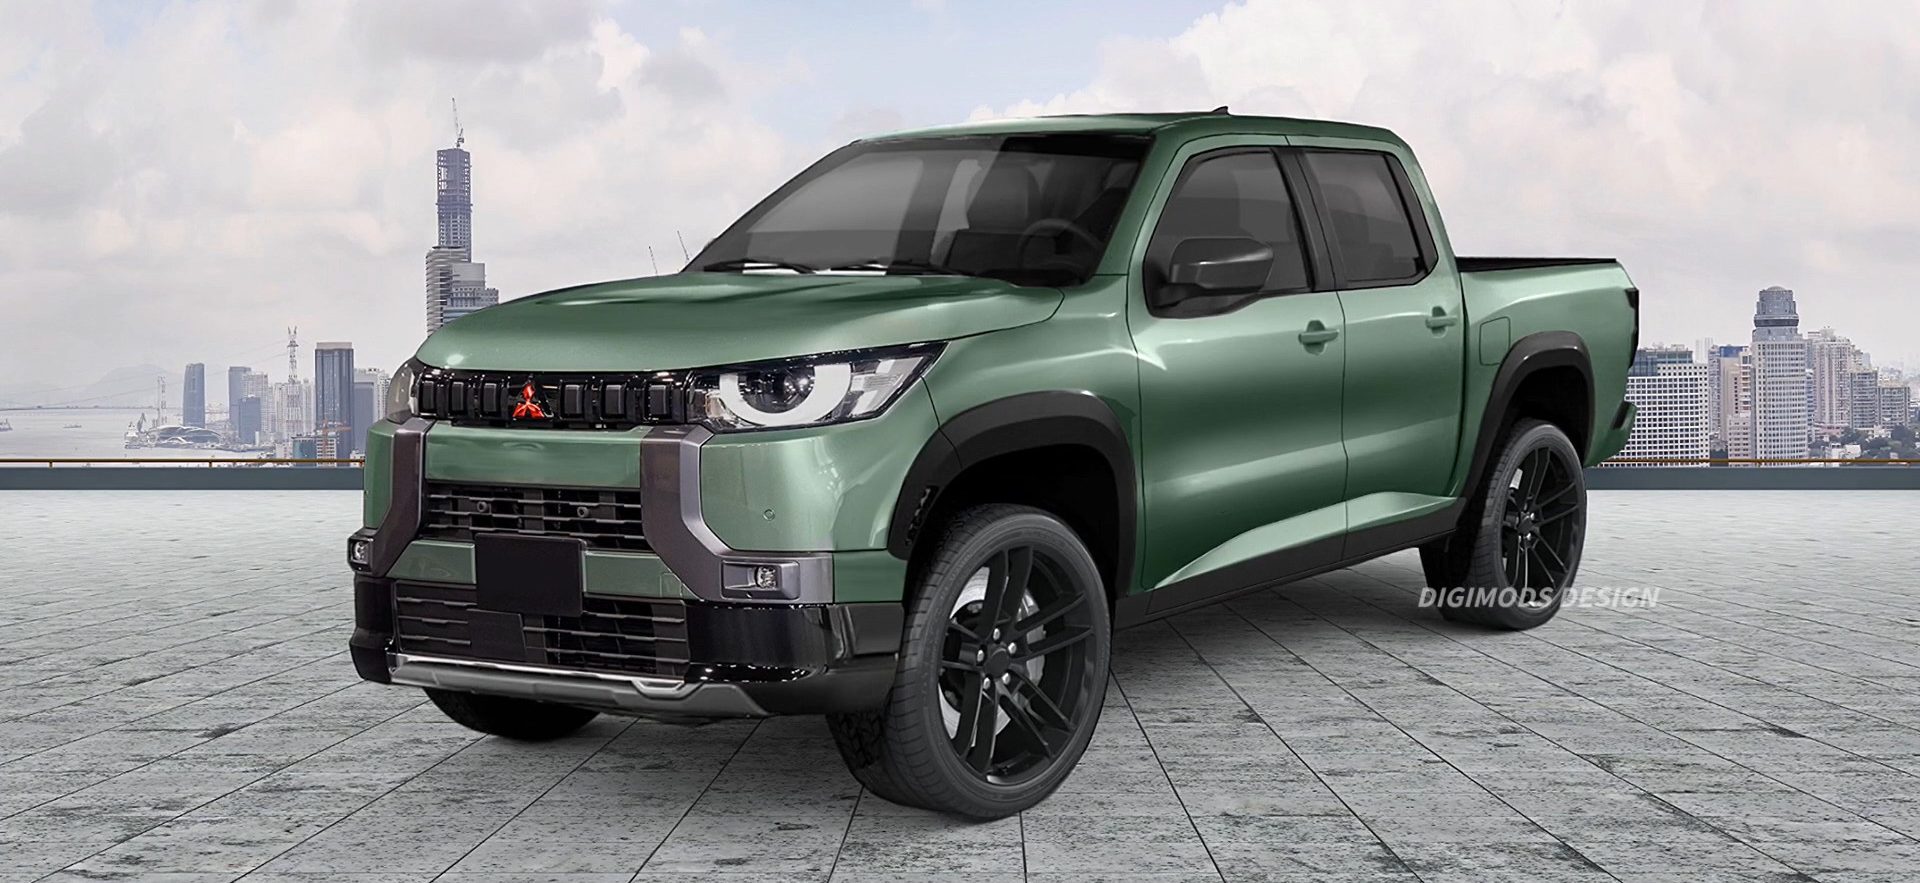 The new Mitsubishi Raider virtual pickup would stand out on the roads and  compete with Tacoma and Ranger - Aglomerado Digital